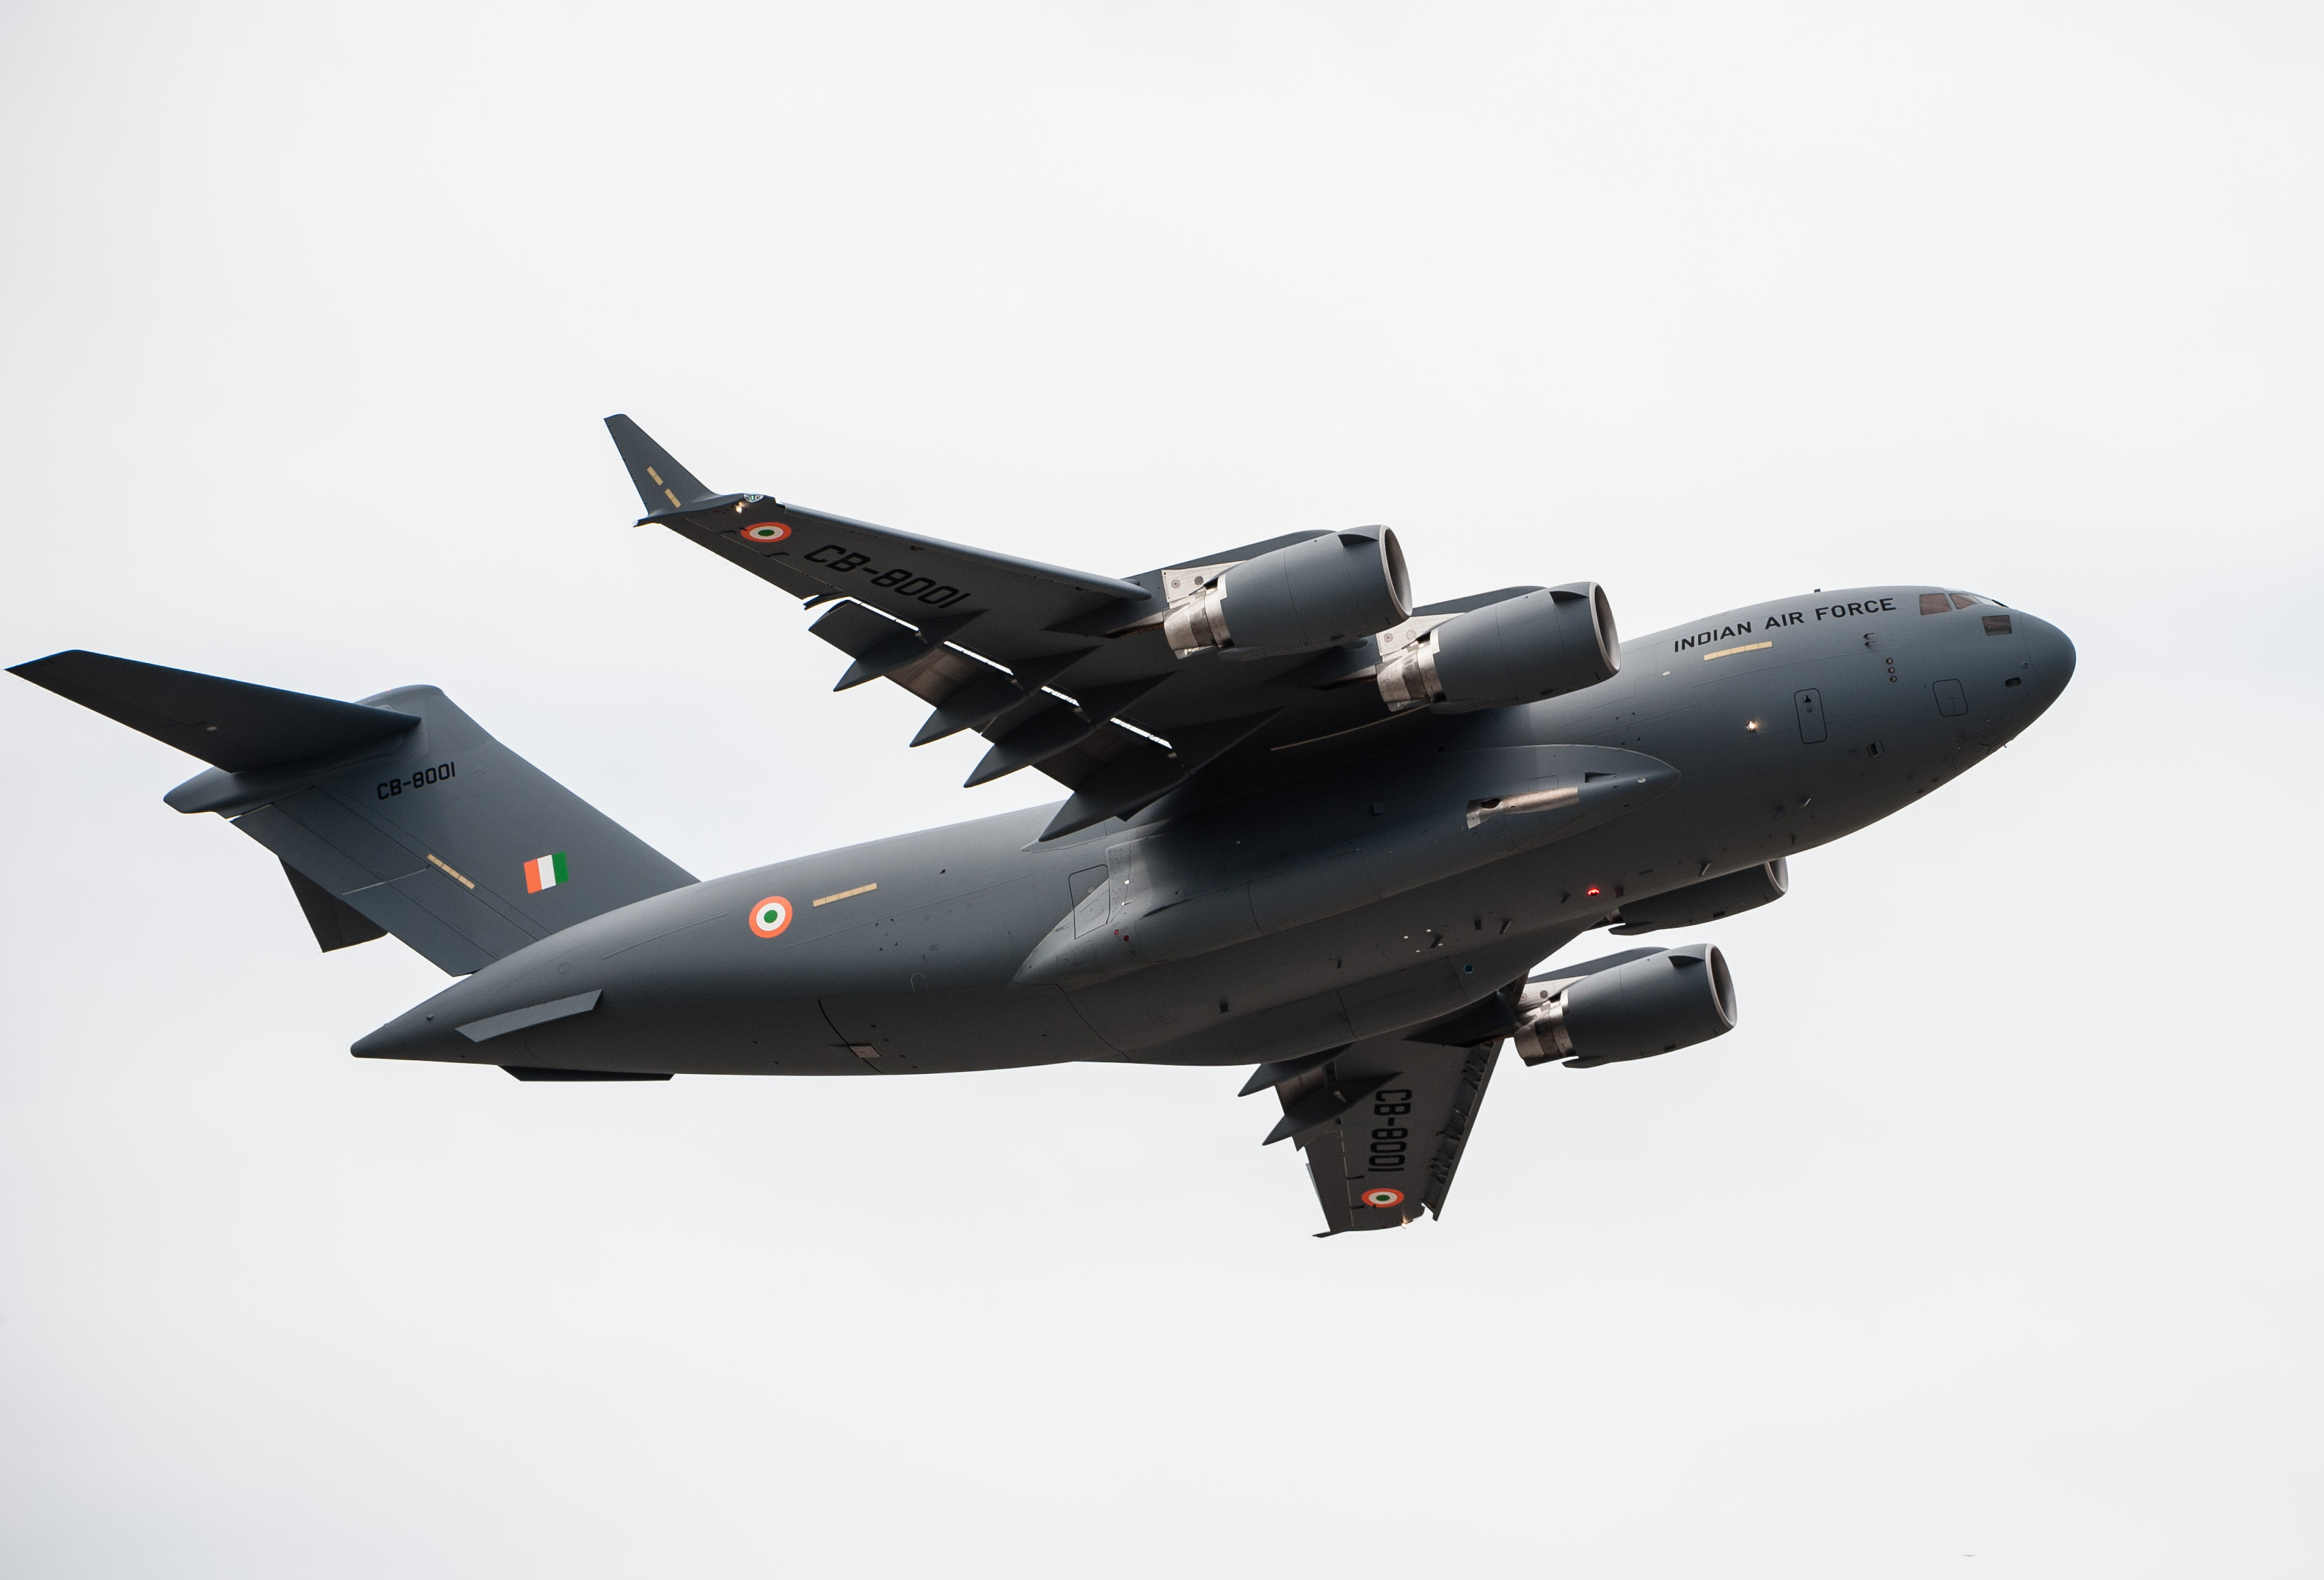 General 3372x2292 Boeing C-17 Globemaster III American aircraft Boeing flying military aircraft Indian Air Force